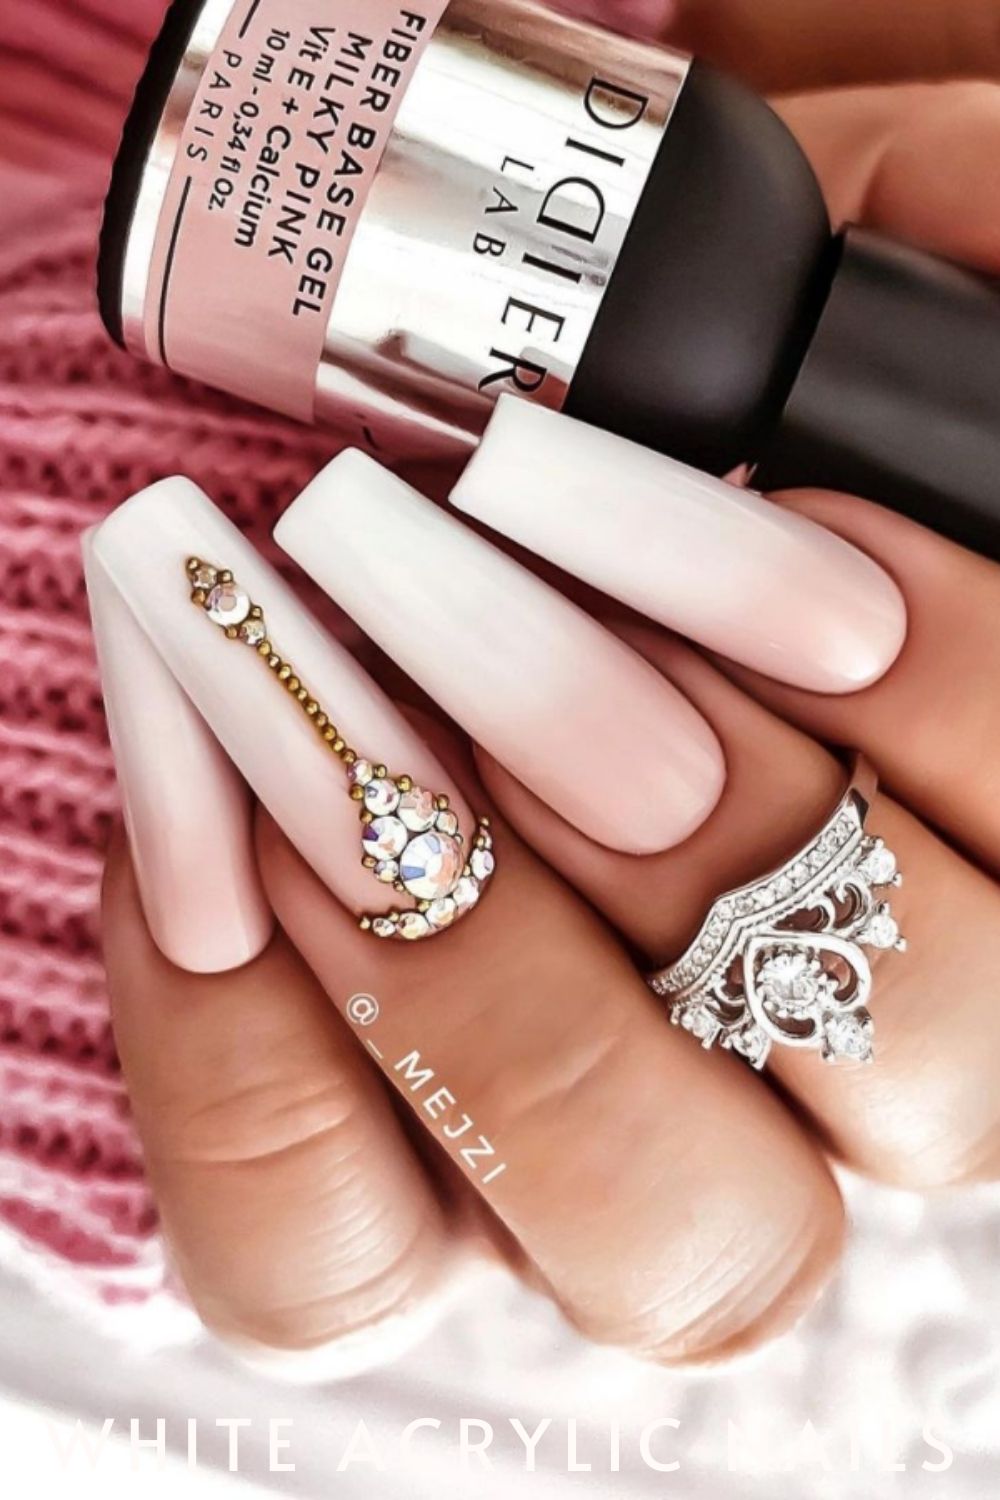 White nail designs for summer nails